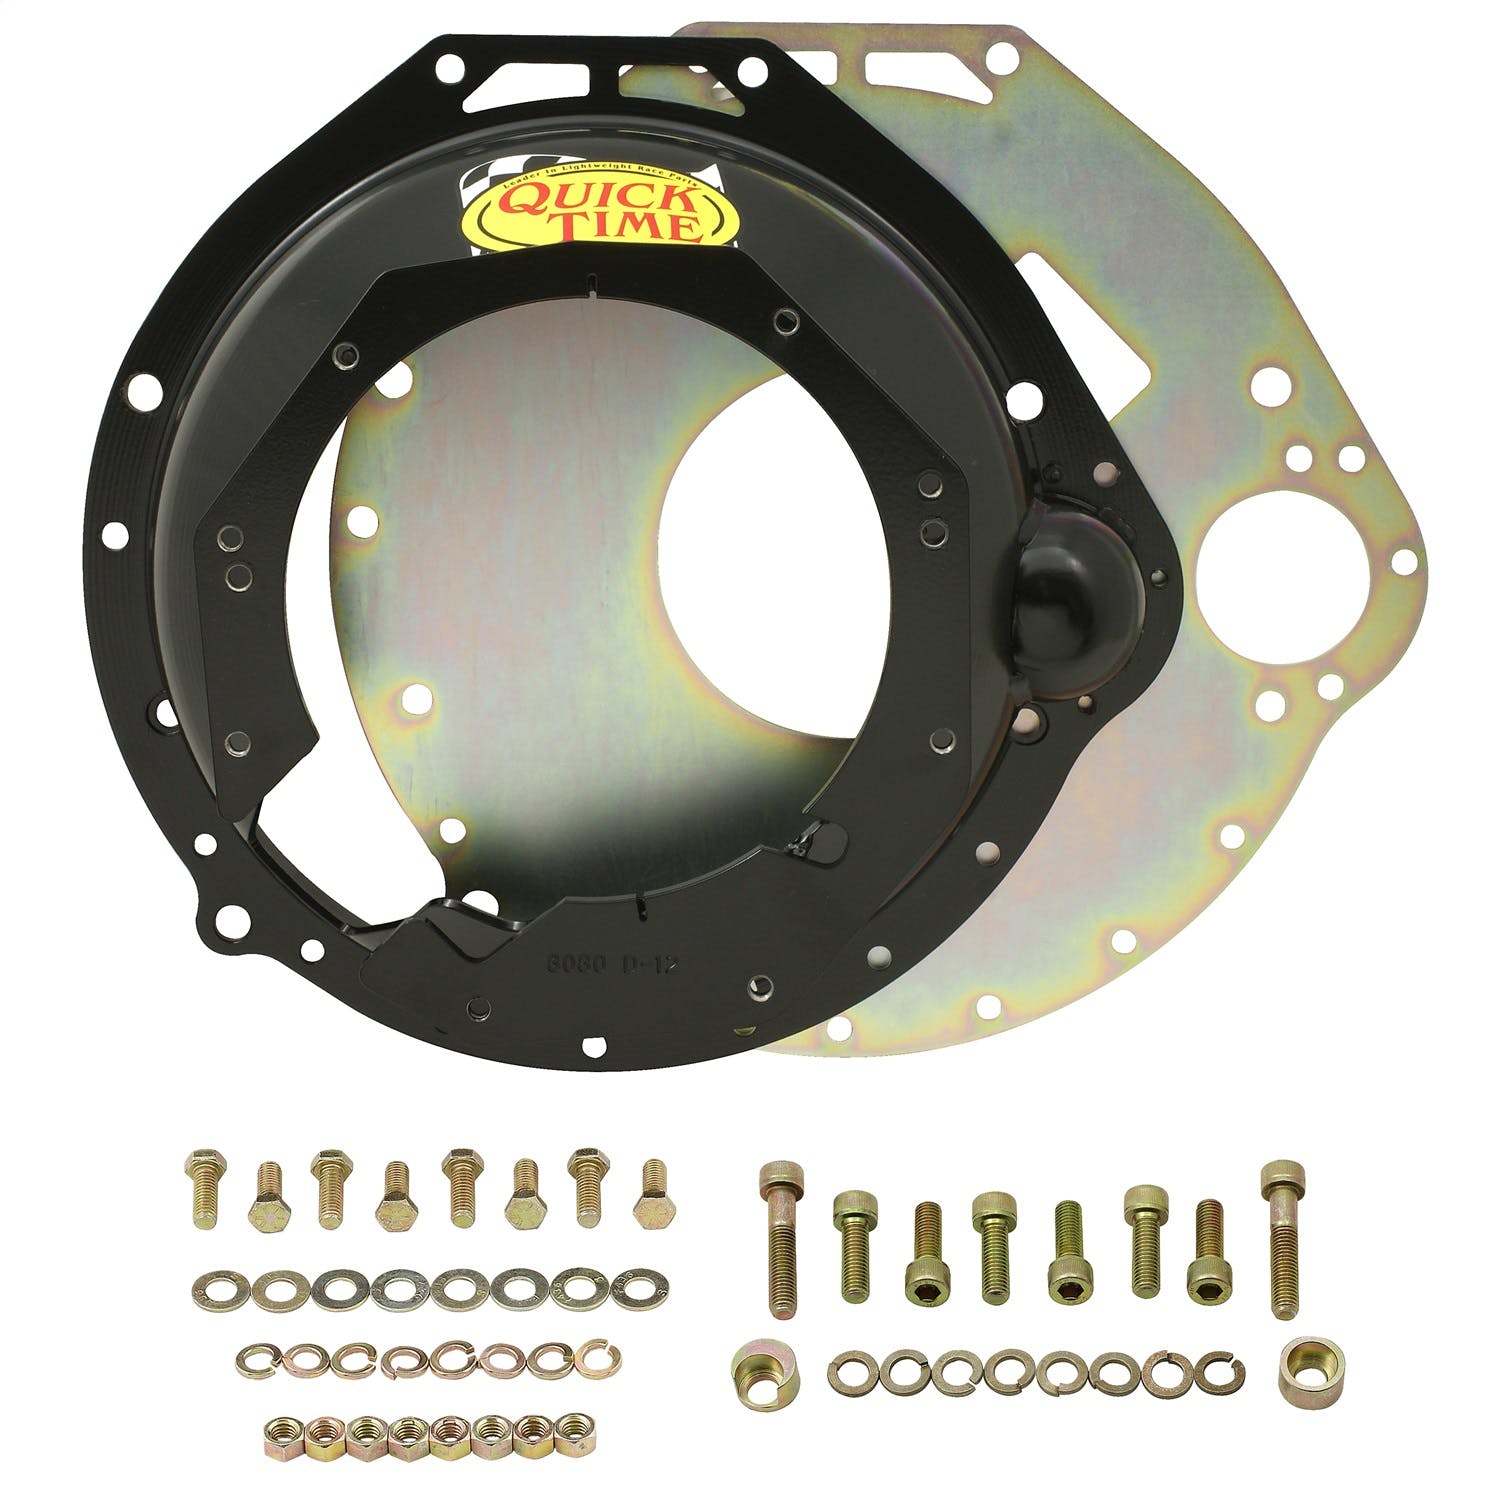 QuickTime RM-8080 Ford 4.6/5.4 to T56 Ford